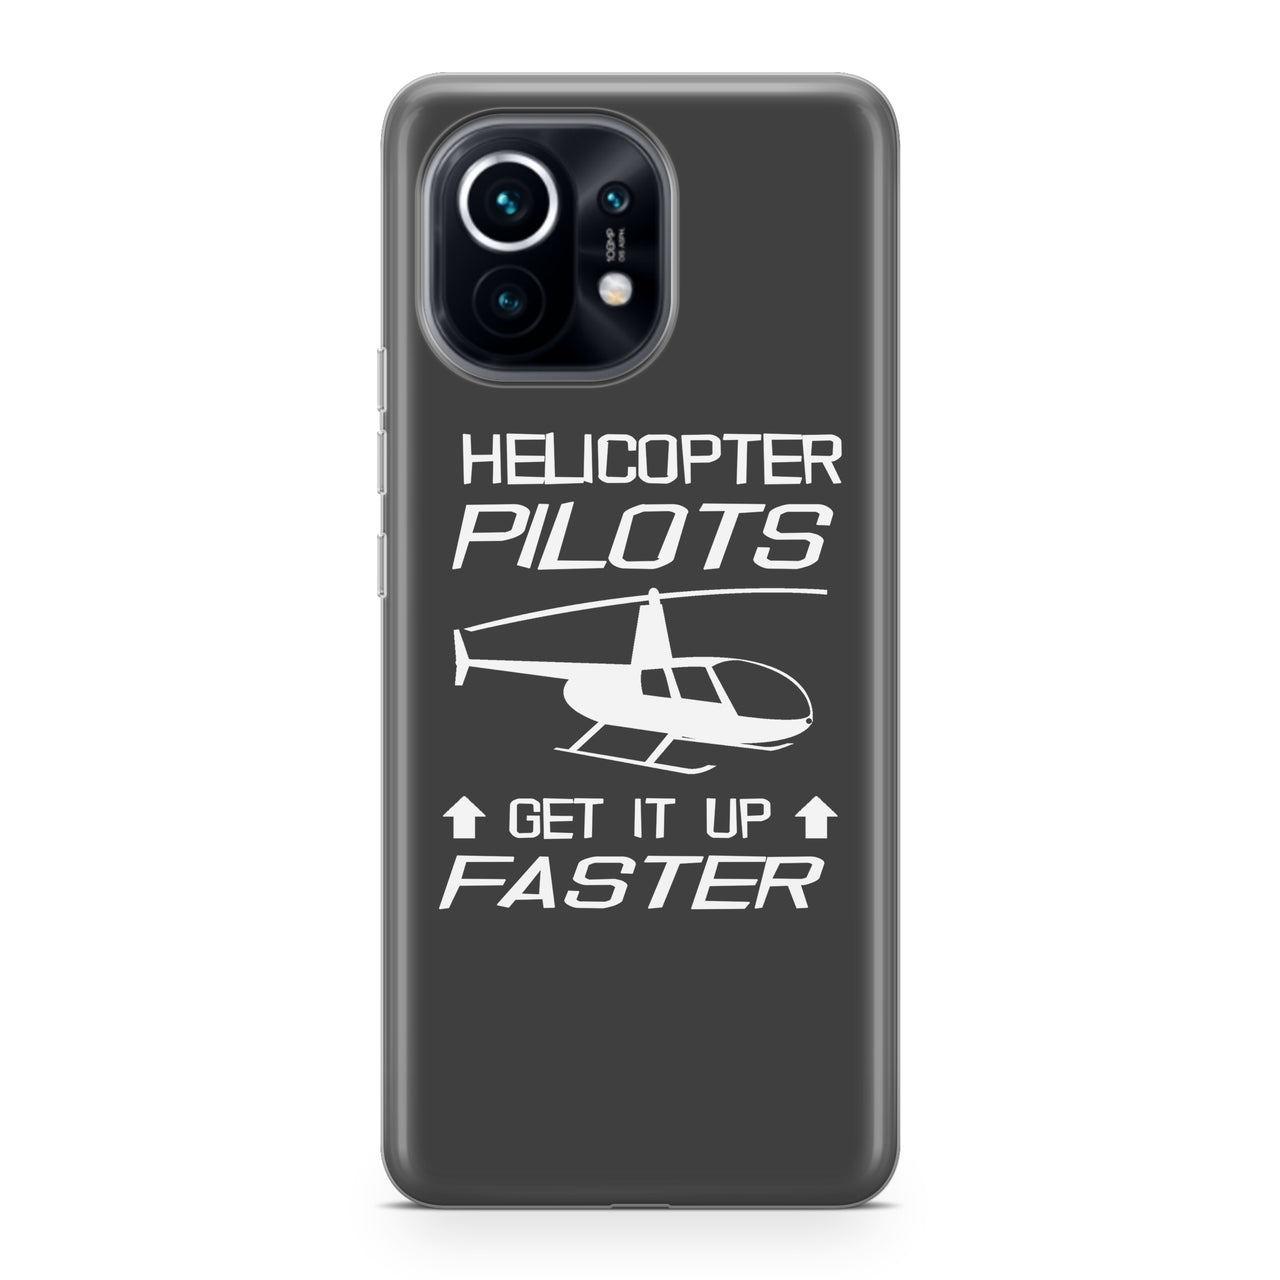 Helicopter Pilots Get It Up Faster Designed Xiaomi Cases